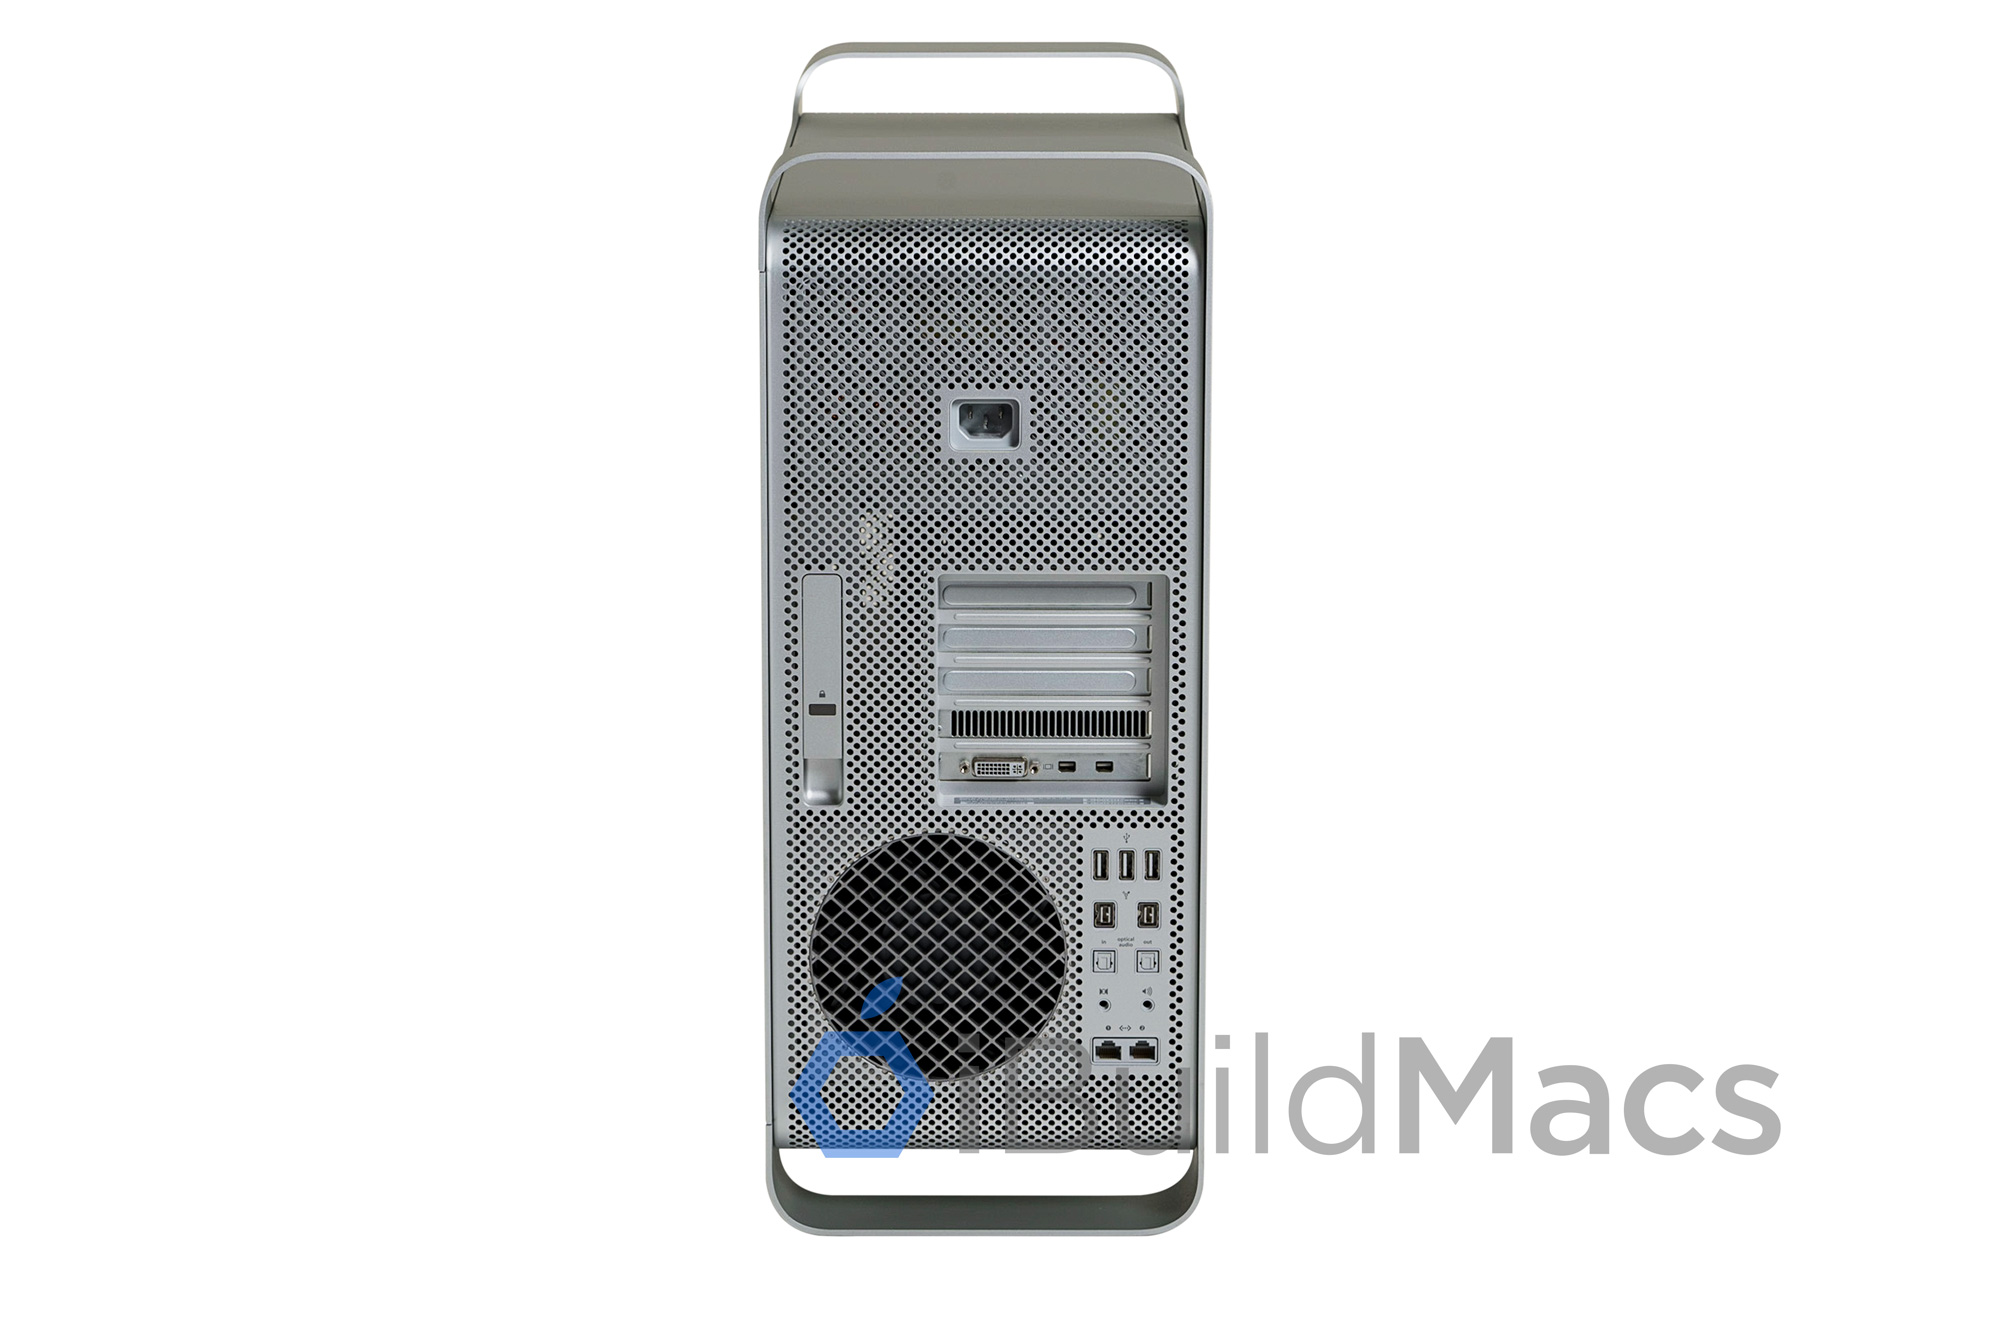 most affordable video card upgrade for mac pro dual-core intel xeon processor speed: 2.66 ghz